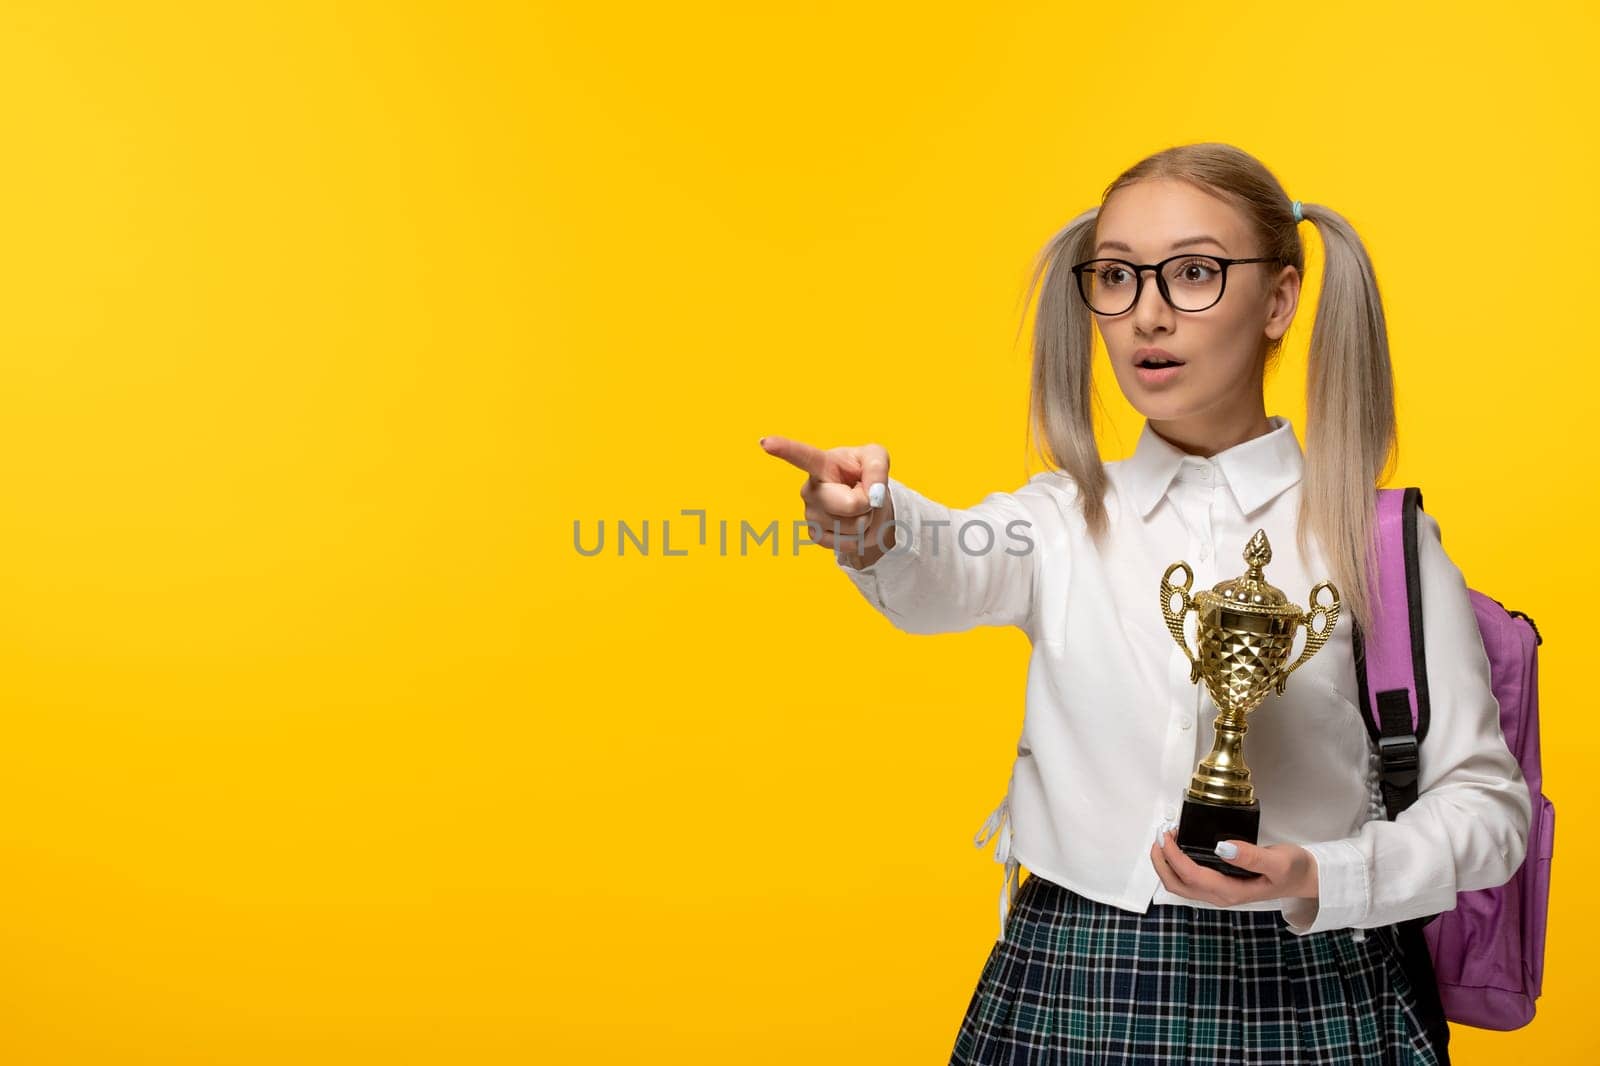 world book day blonde cute schoolgirl in uniform pointing left and holding a trophy